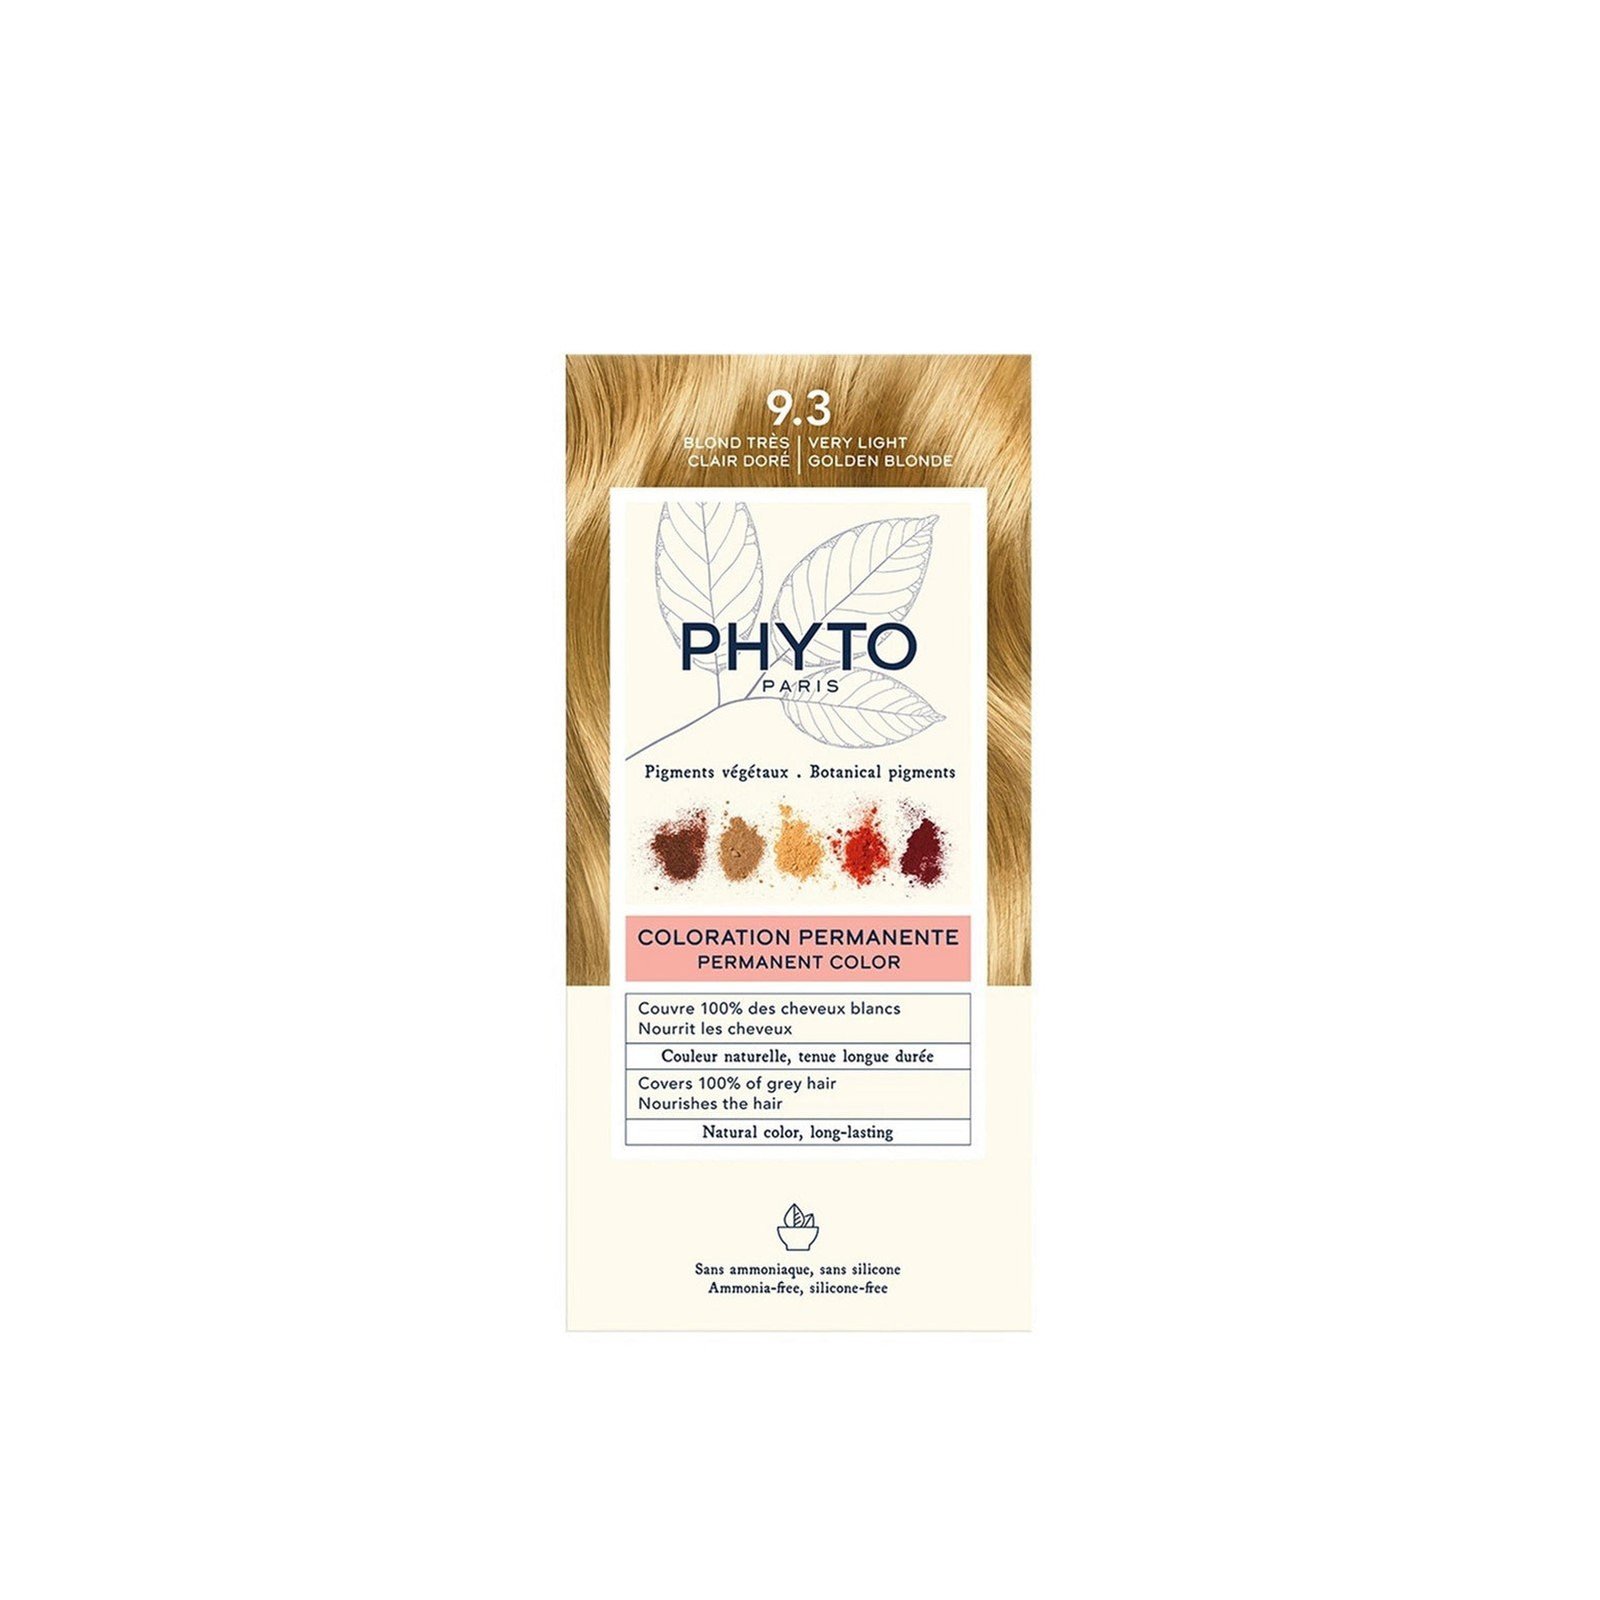 Phytocolor Permanent Color Shade 9.3 Very Light Golden Blonde